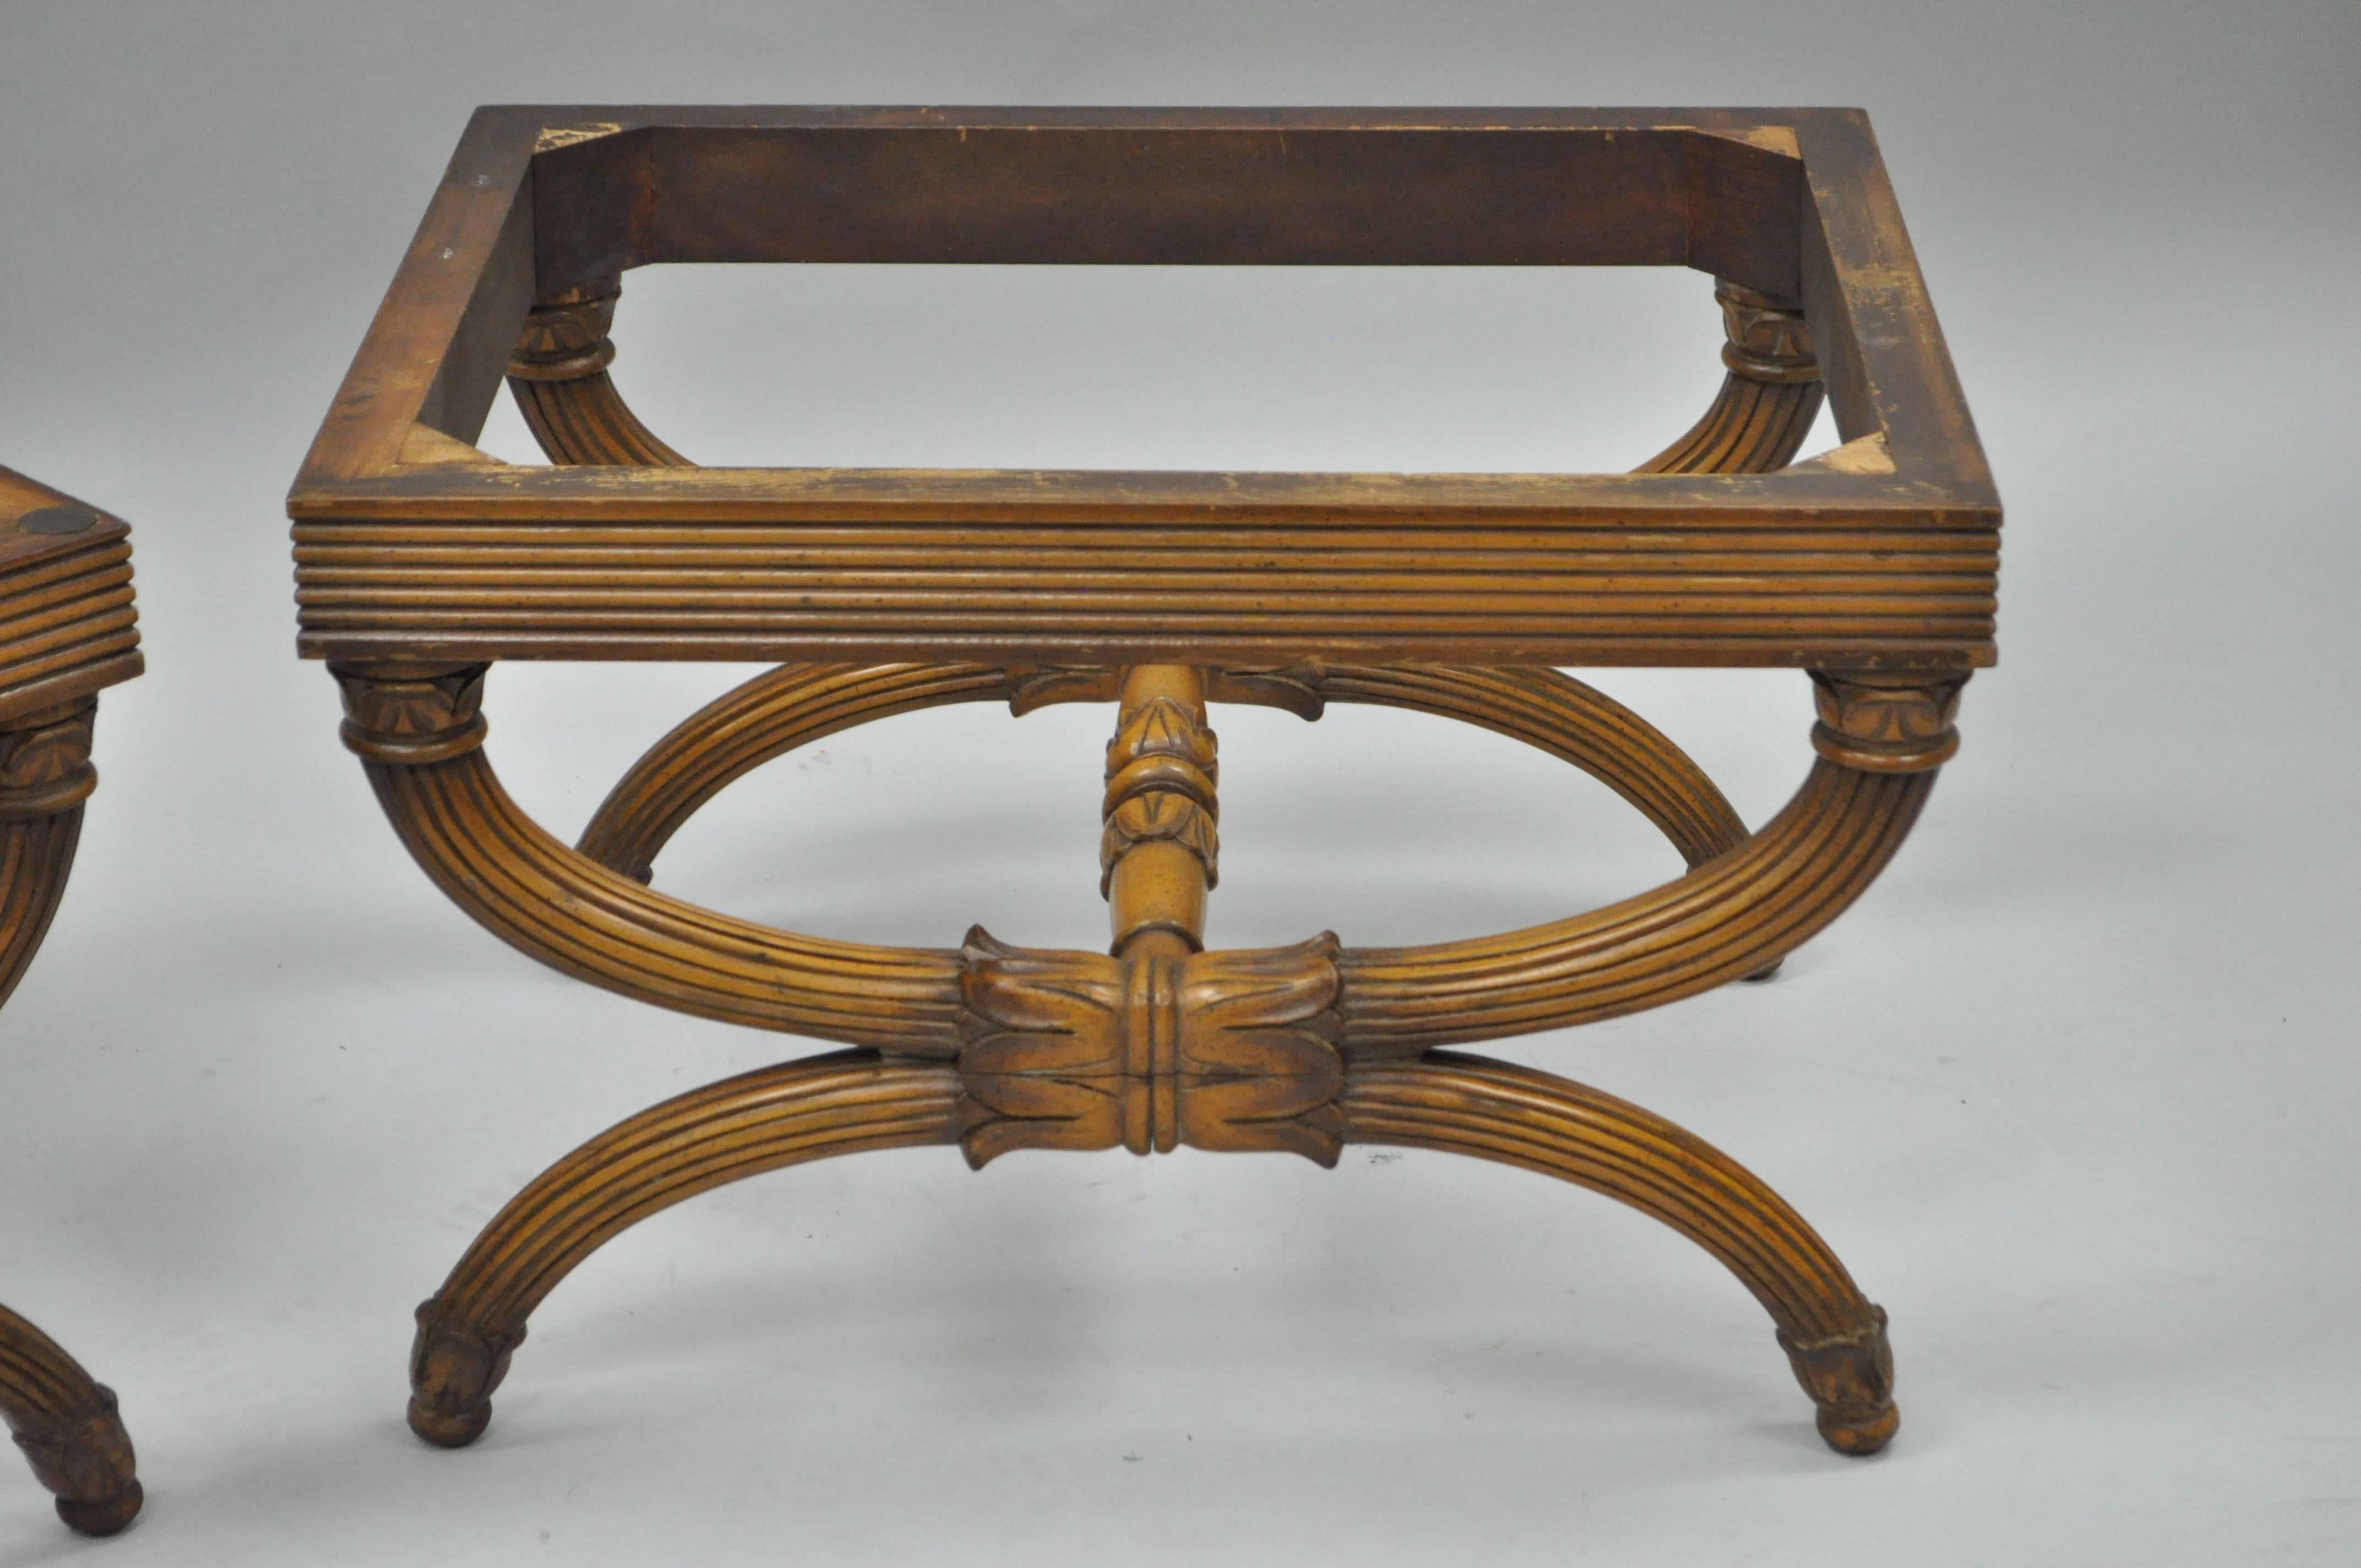 American Pair of Carved Walnut French Neoclassical Style Curule X-Form Benches or Stools